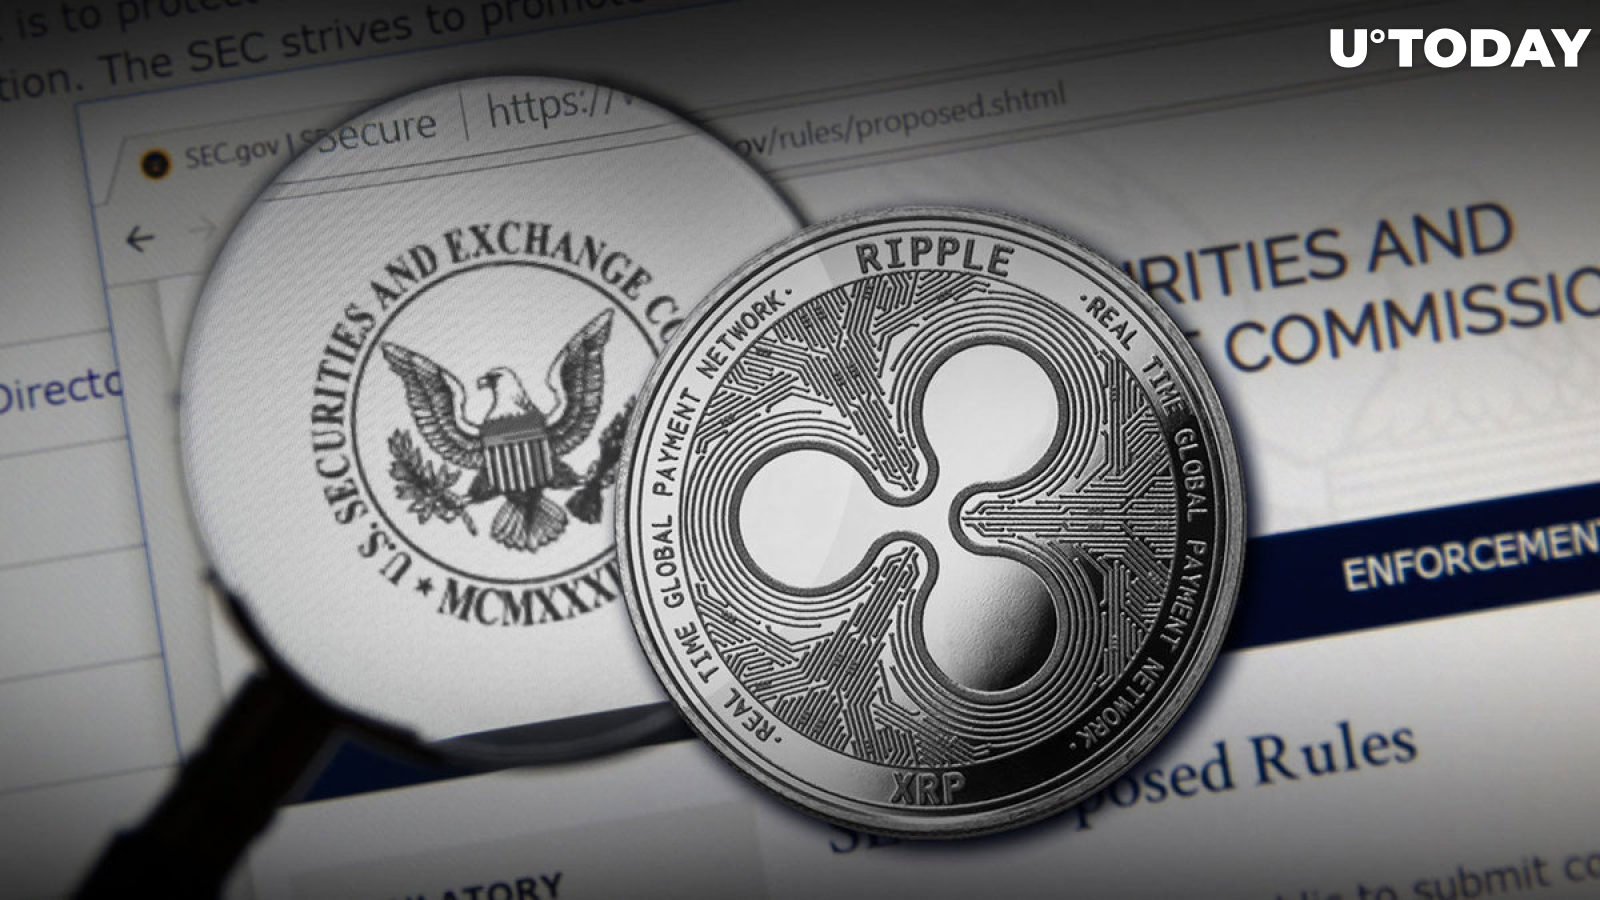 Ripple GC: SEC Has Not Labeled XRP Security